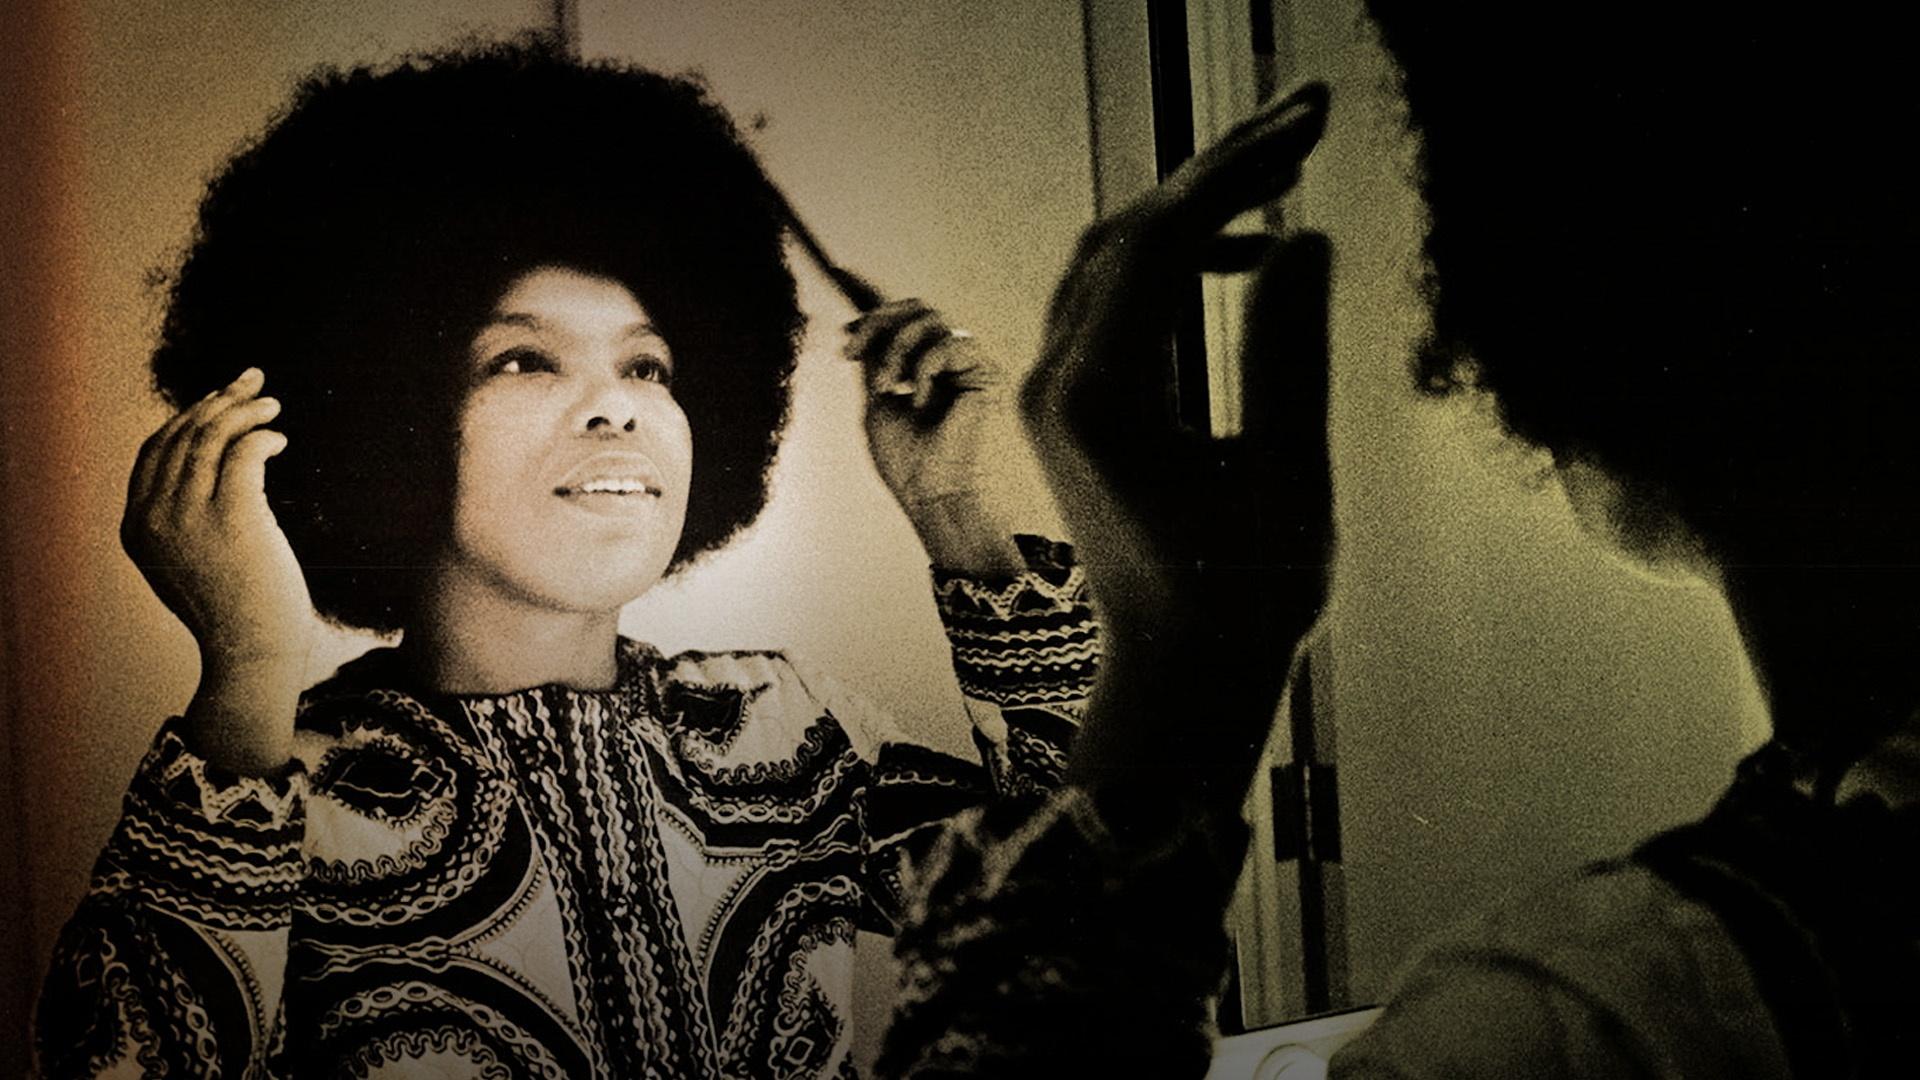 A Black woman looking into a mirror to comb her Black hair